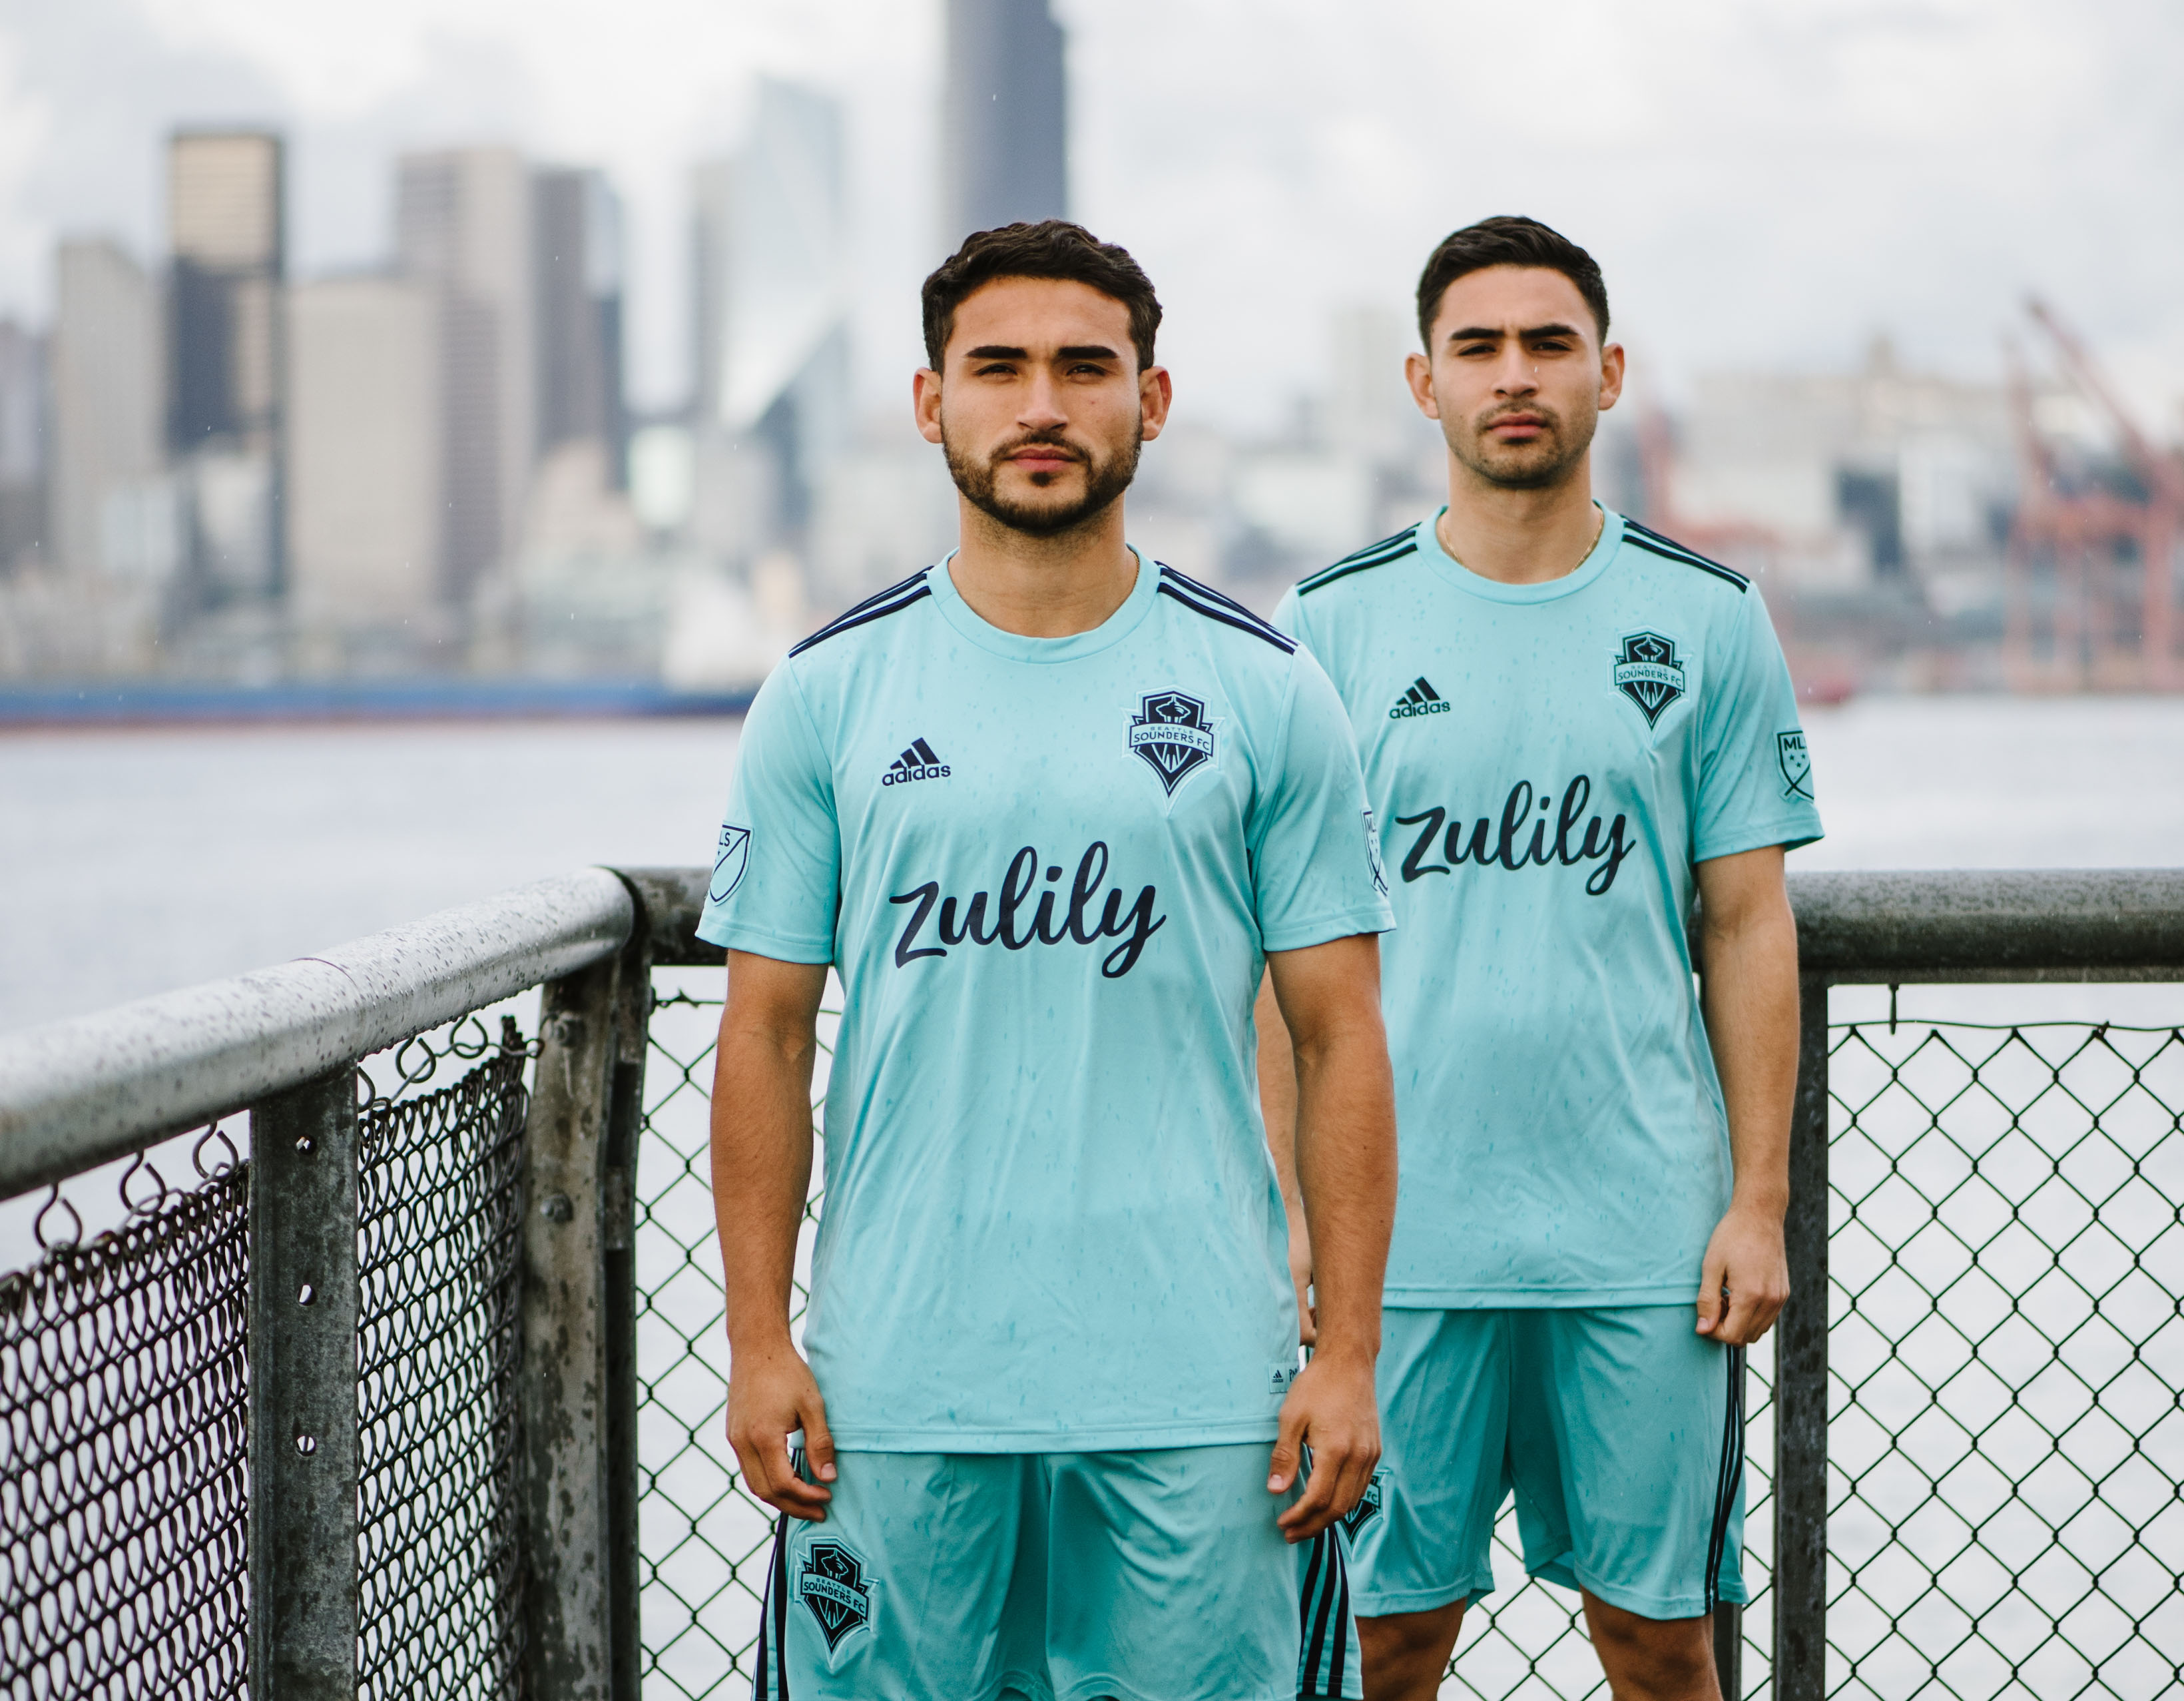 eliminar comerciante Rebotar Sounders FC to wear Parley kits on April 21 against LAFC | Seattle Sounders